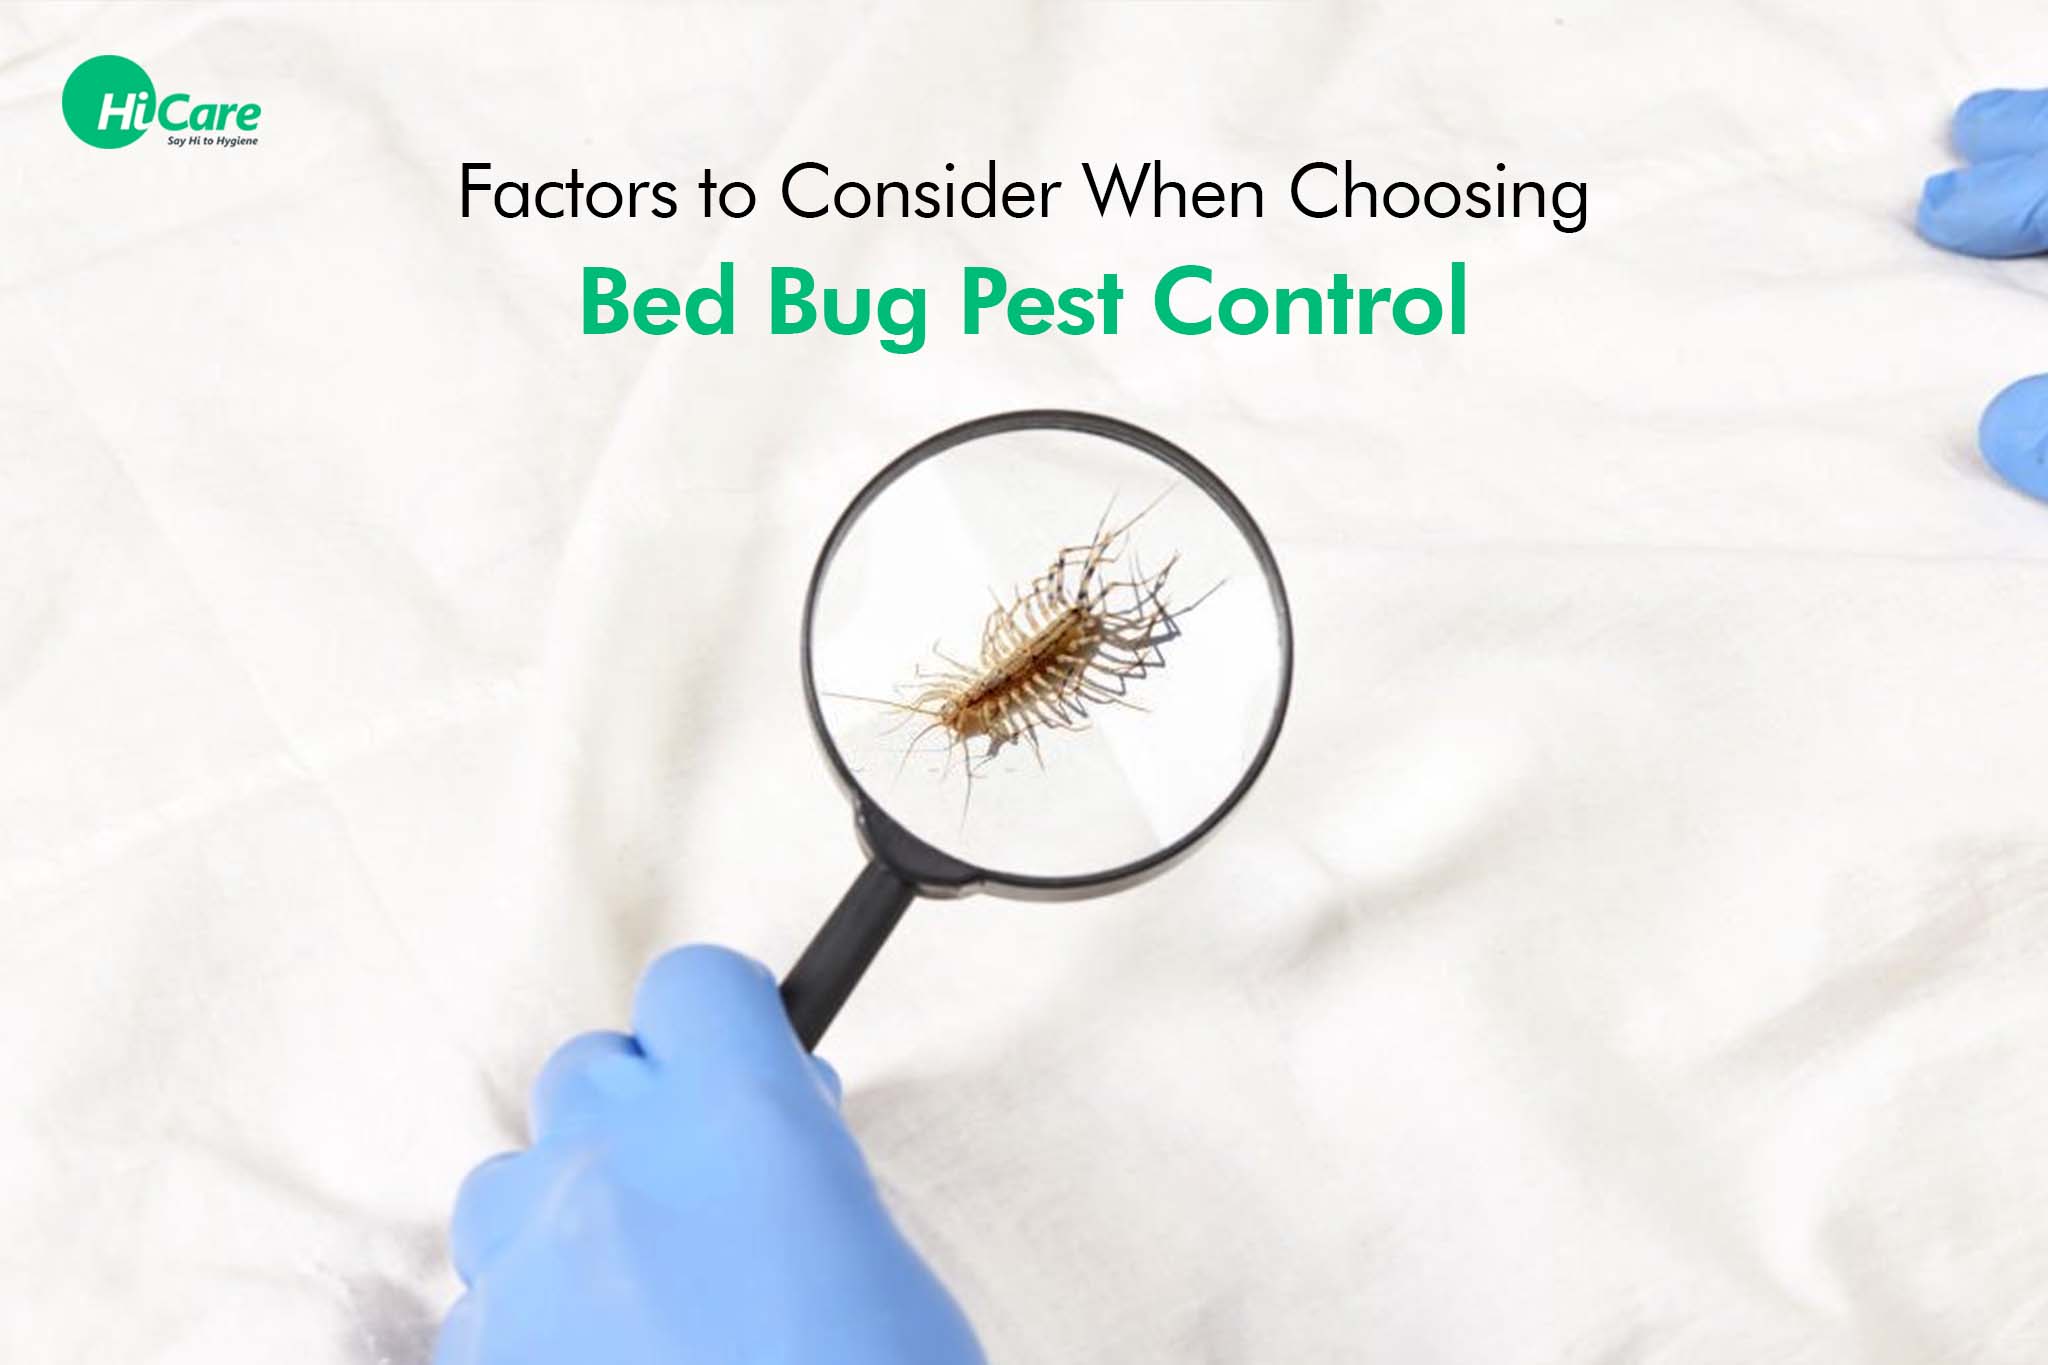 7 Factors to Consider When Choosing Bed Bug Pest Control | HiCare